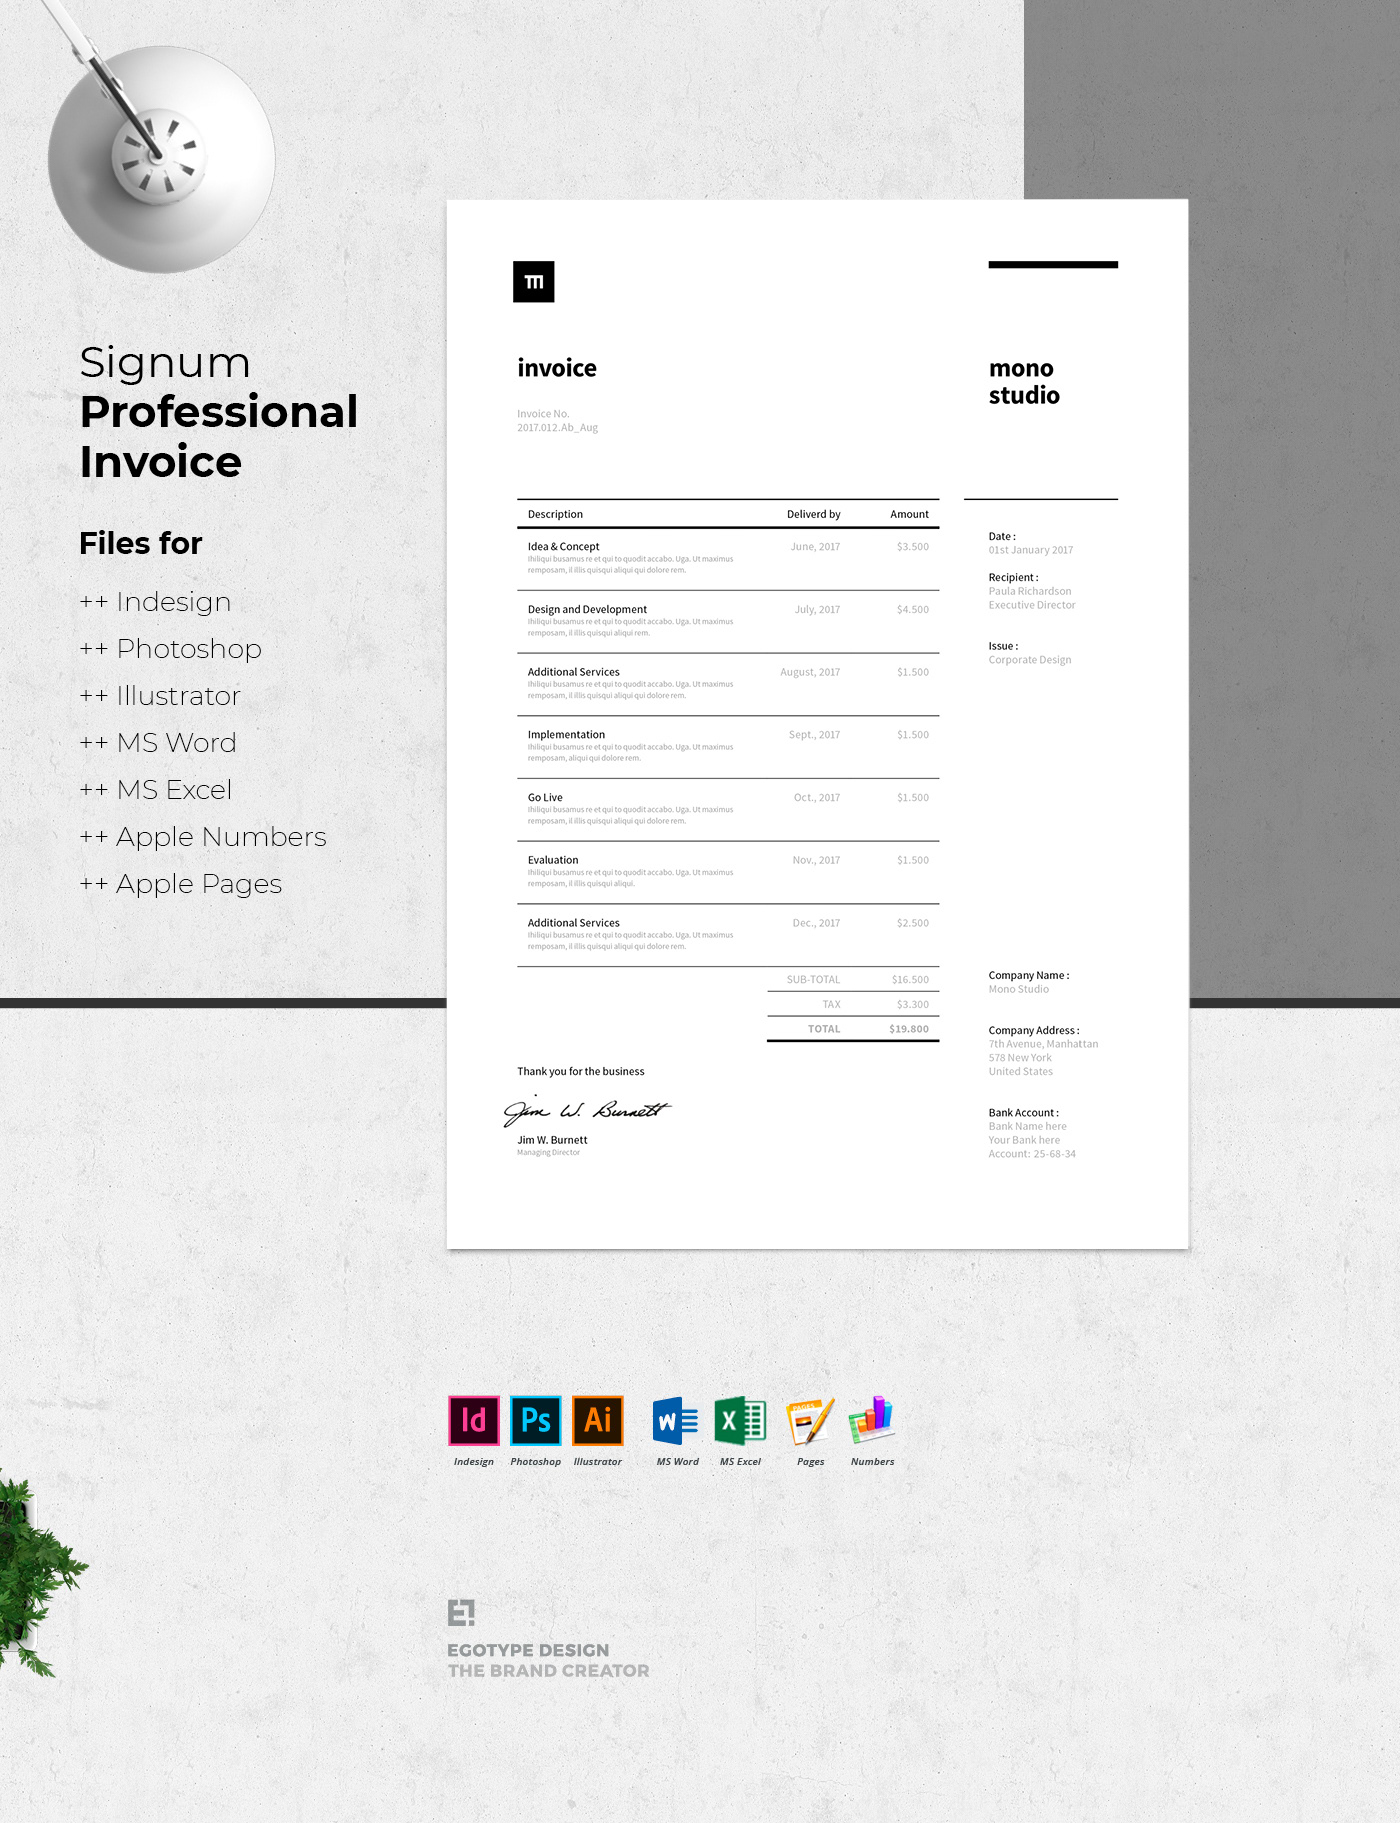 invoice Excel Microsoft word apple company iWorks professional template adobe